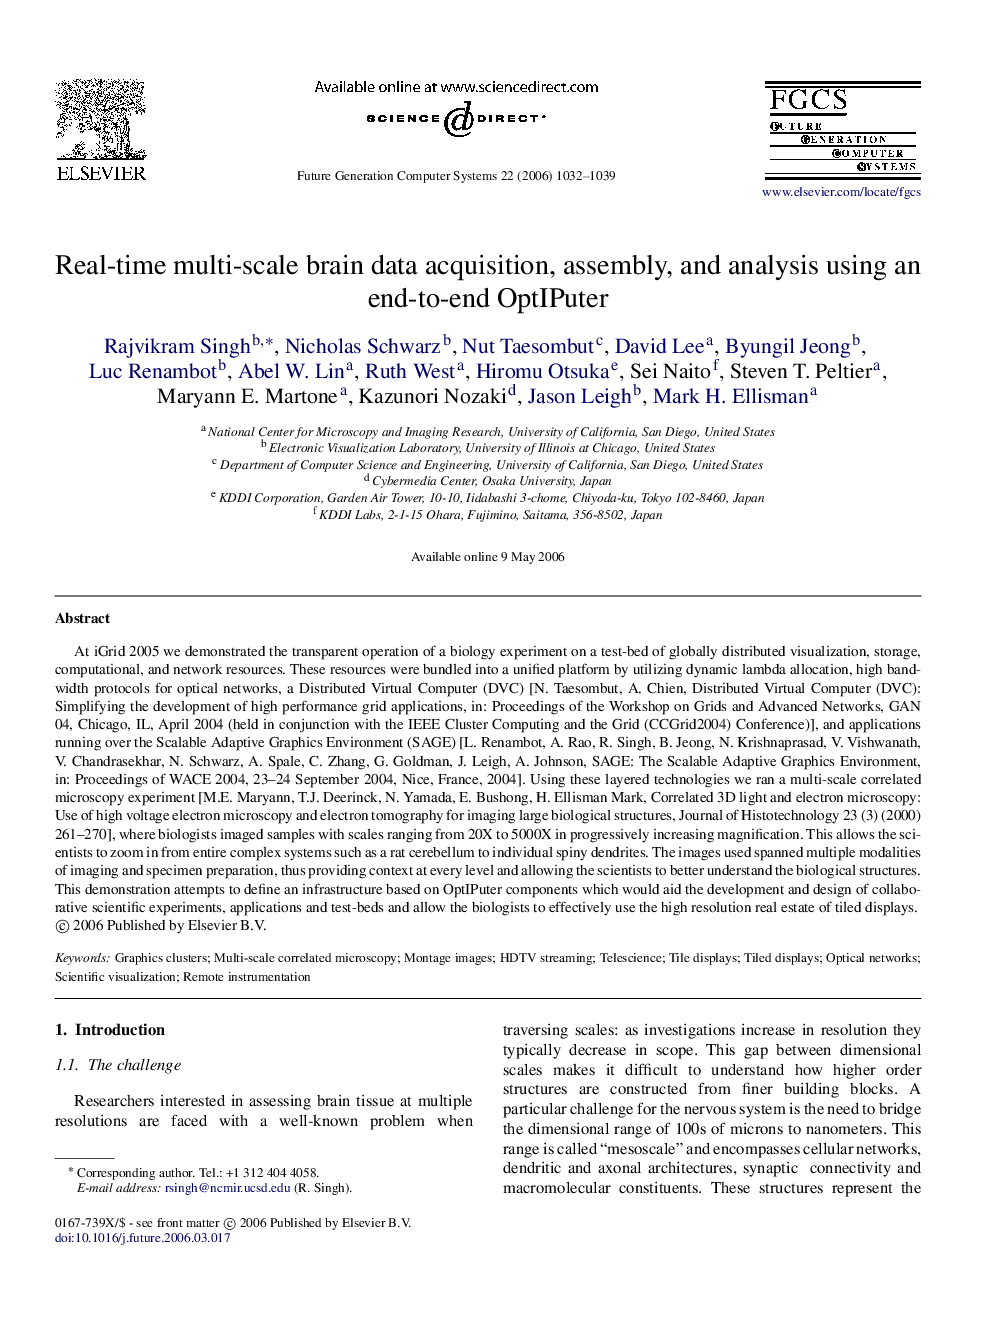 Real-time multi-scale brain data acquisition, assembly, and analysis using an end-to-end OptIPuter